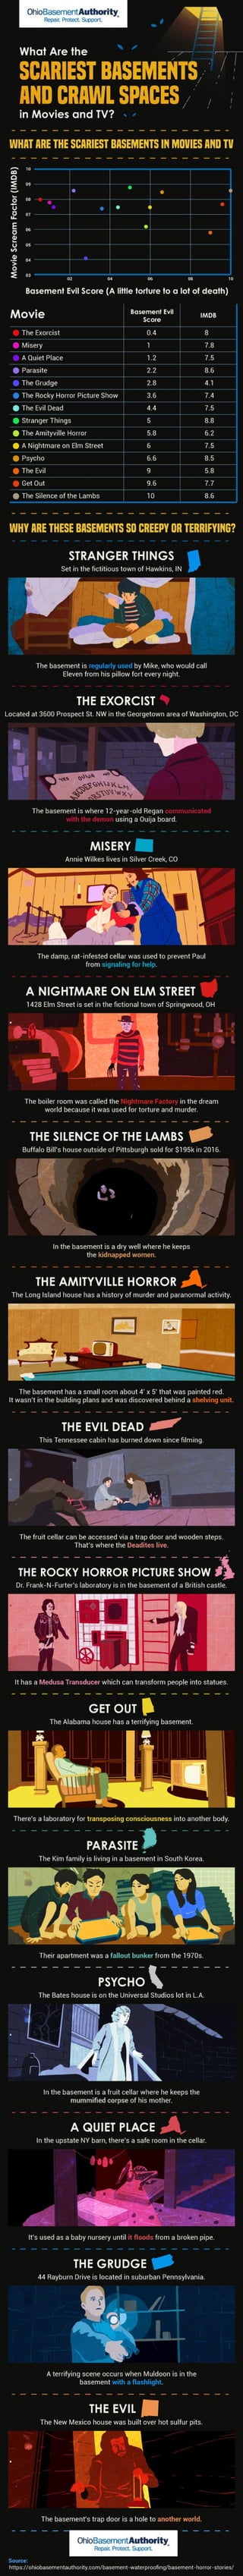 SCARIEST BASEMENTS IN MOVIES & TV